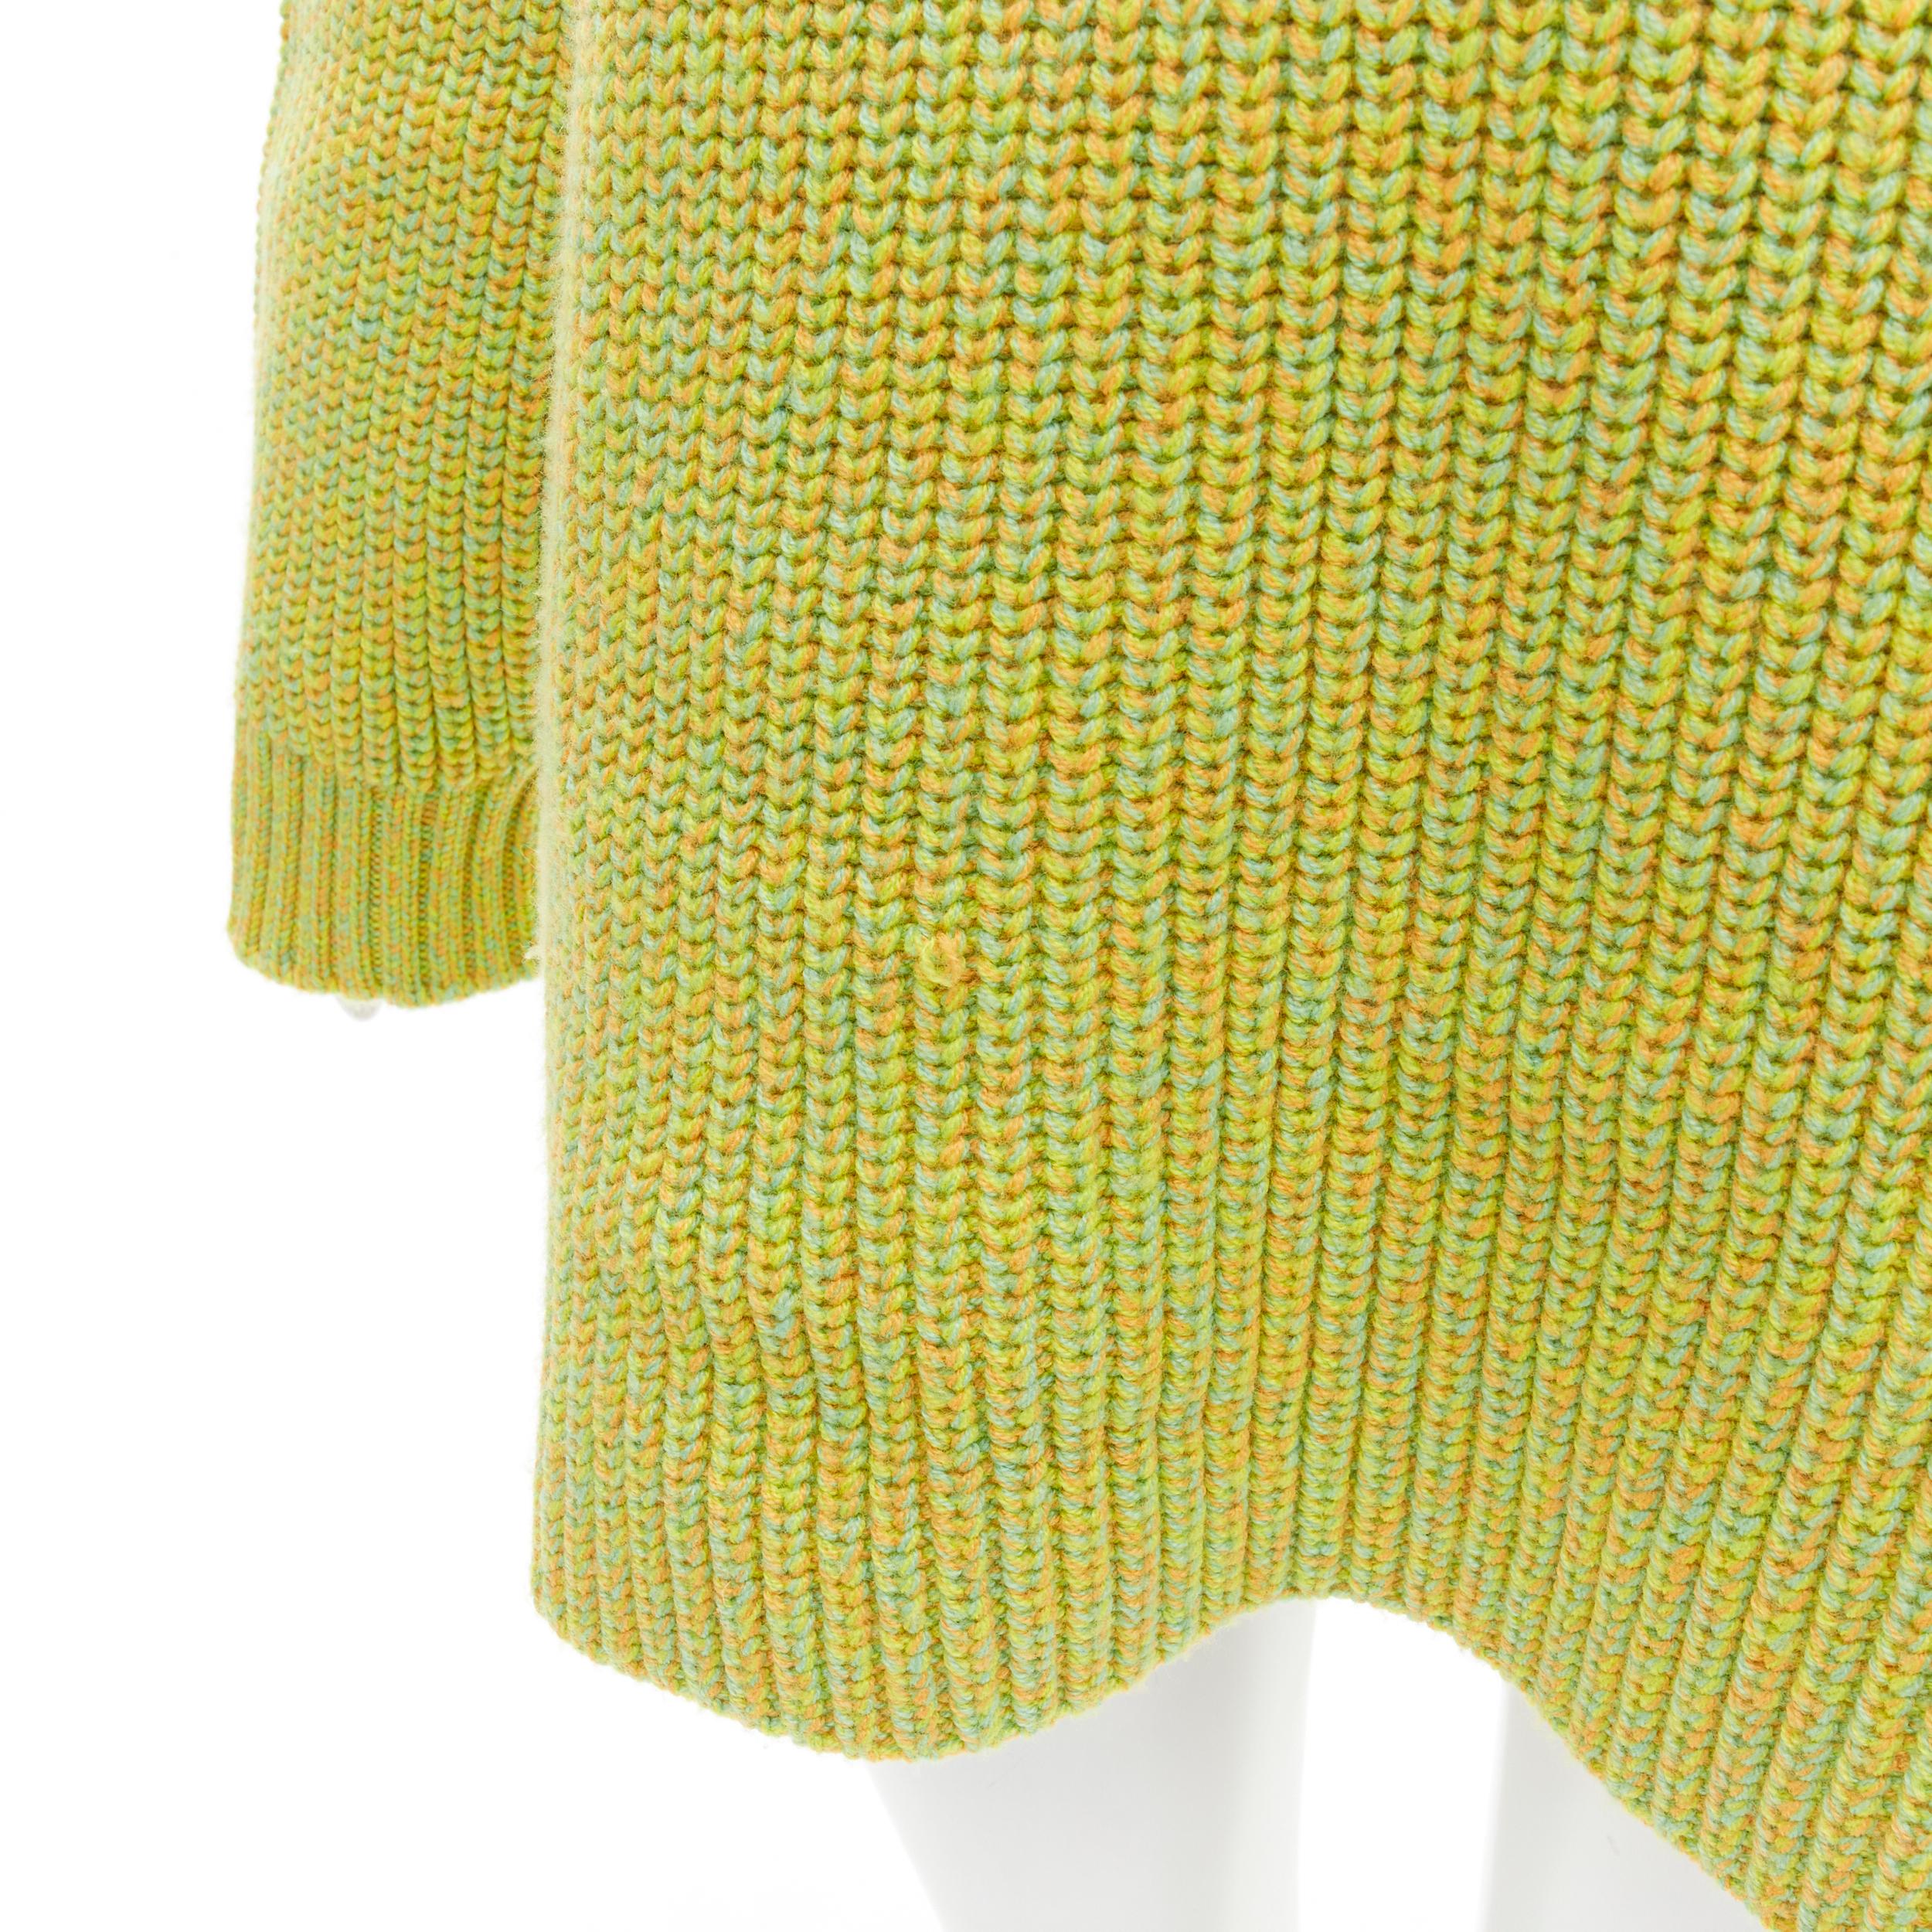 TIBI 100% merino wool lime yellow contrast rolled turtleneck sweater M/L For Sale 3